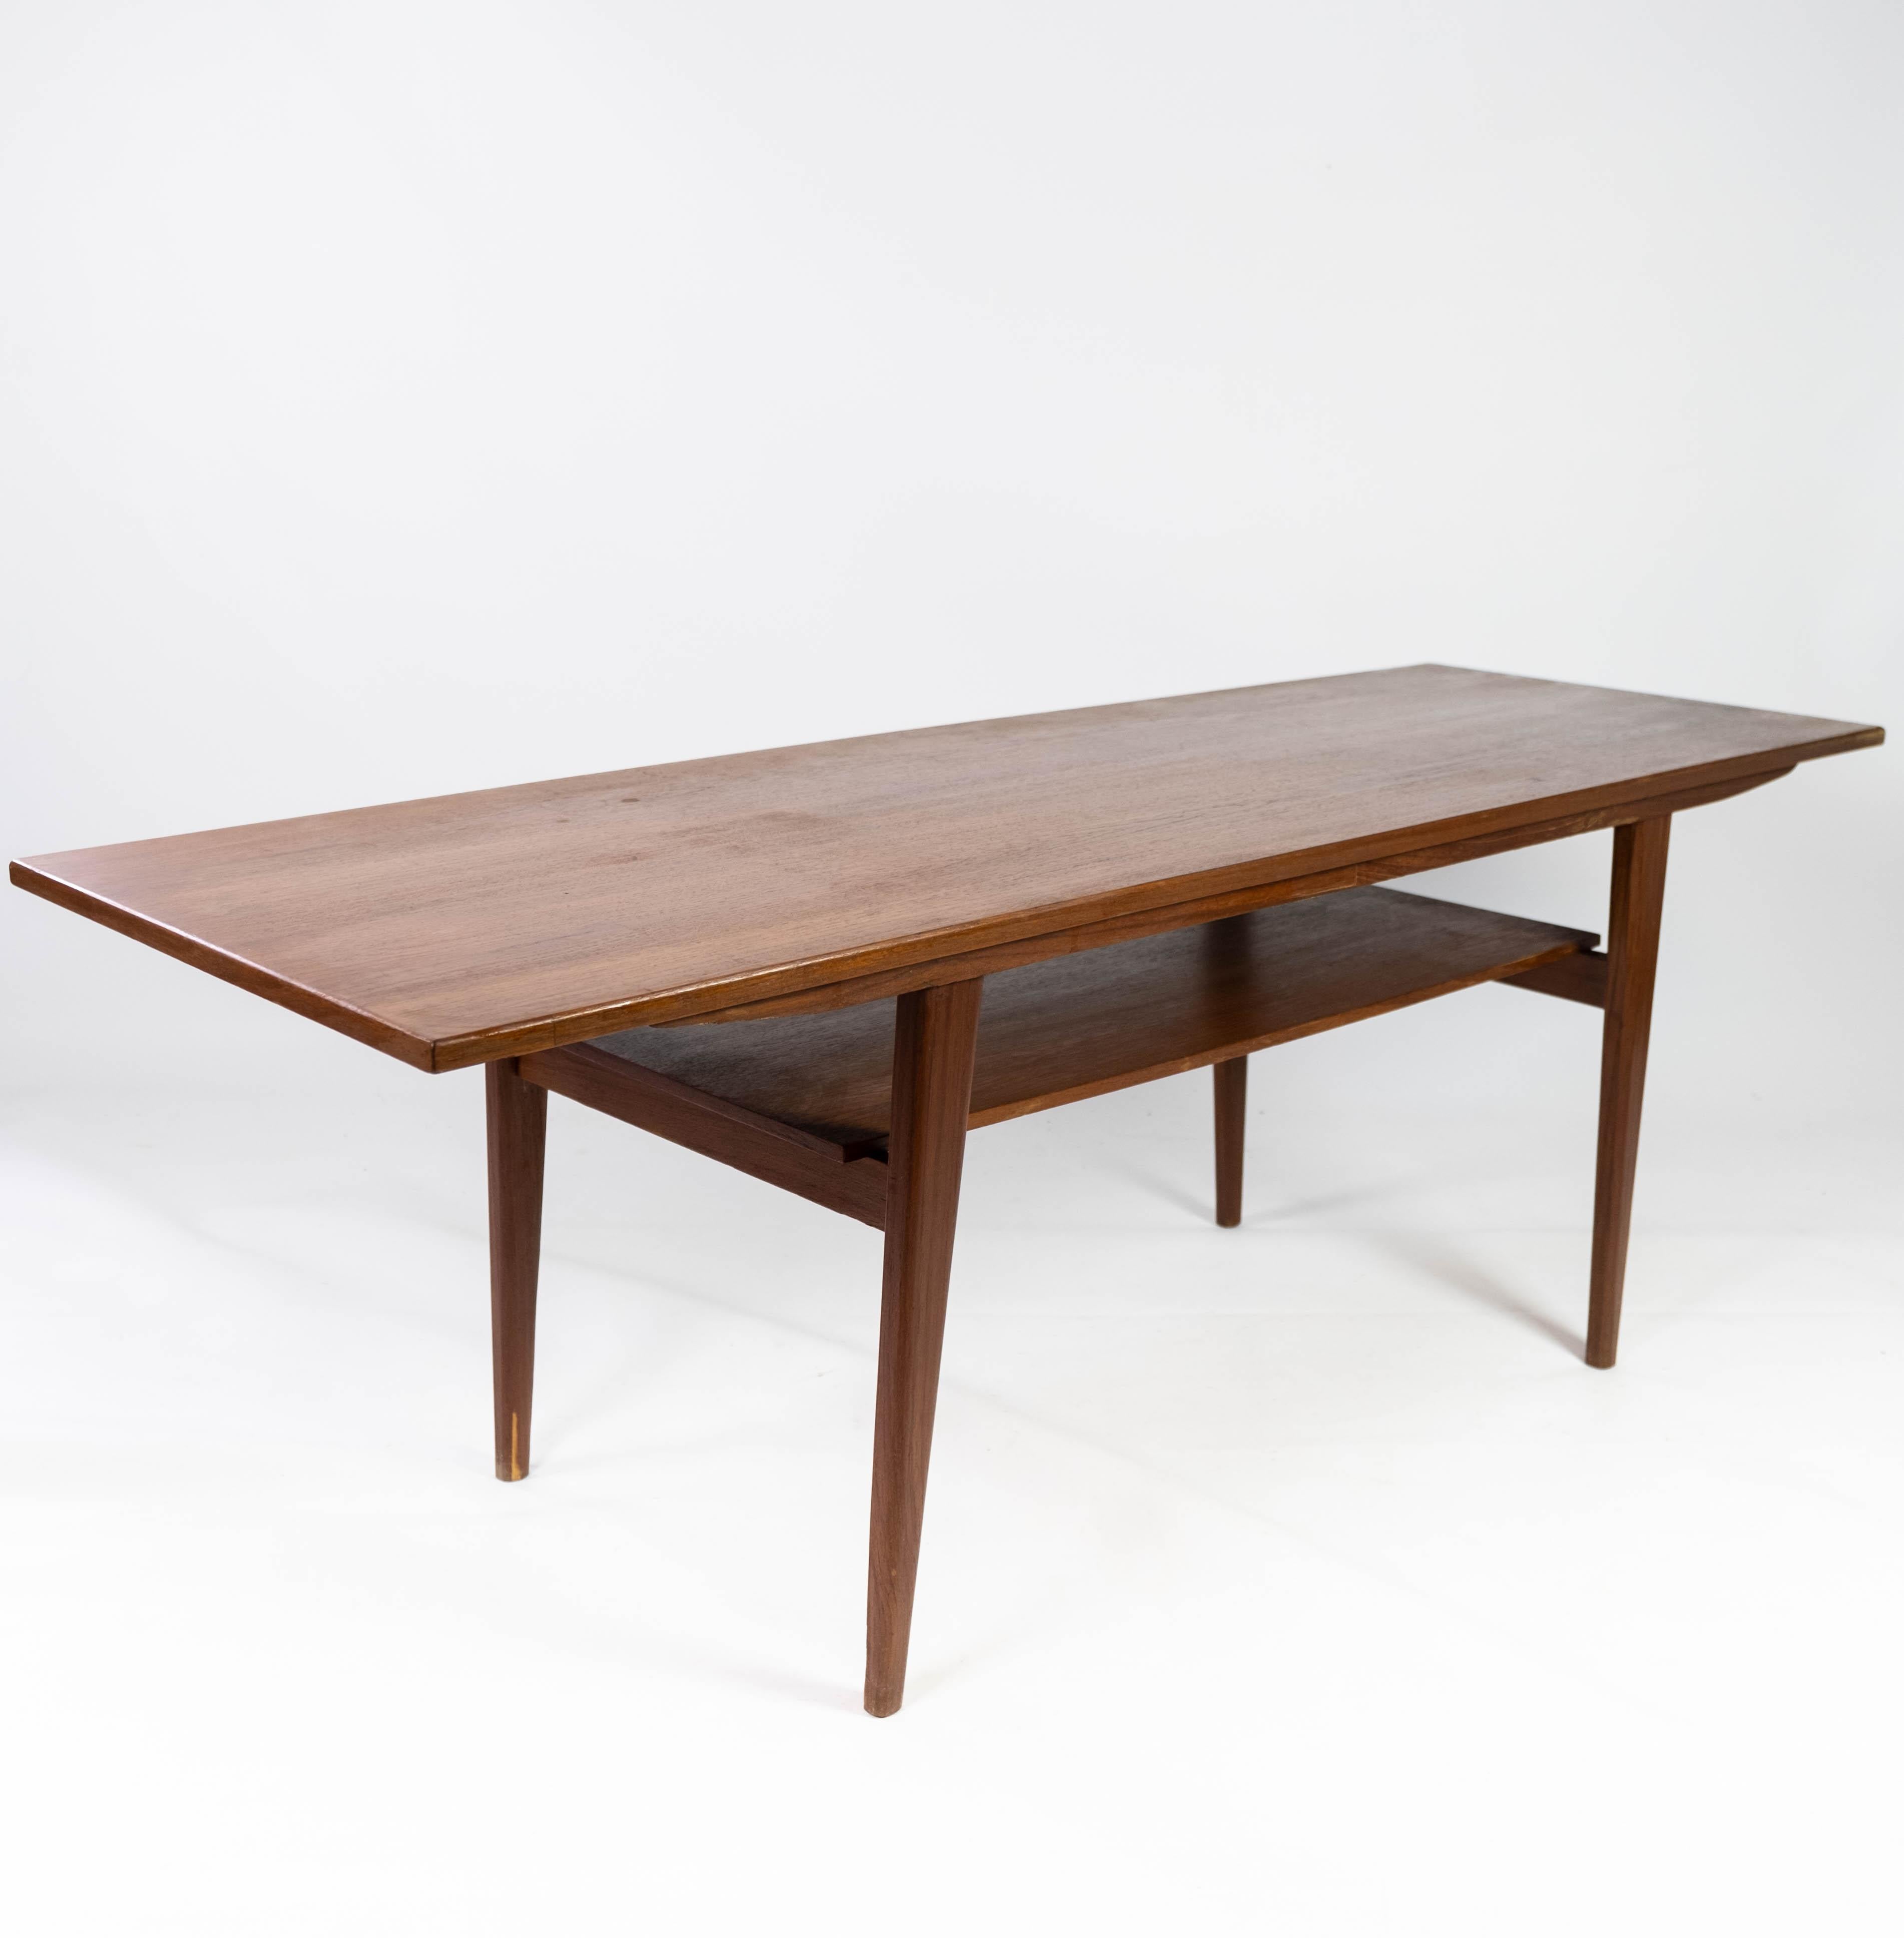 Coffee Table Made In Teak With Shelf, Danish Design From 1960s For Sale 1